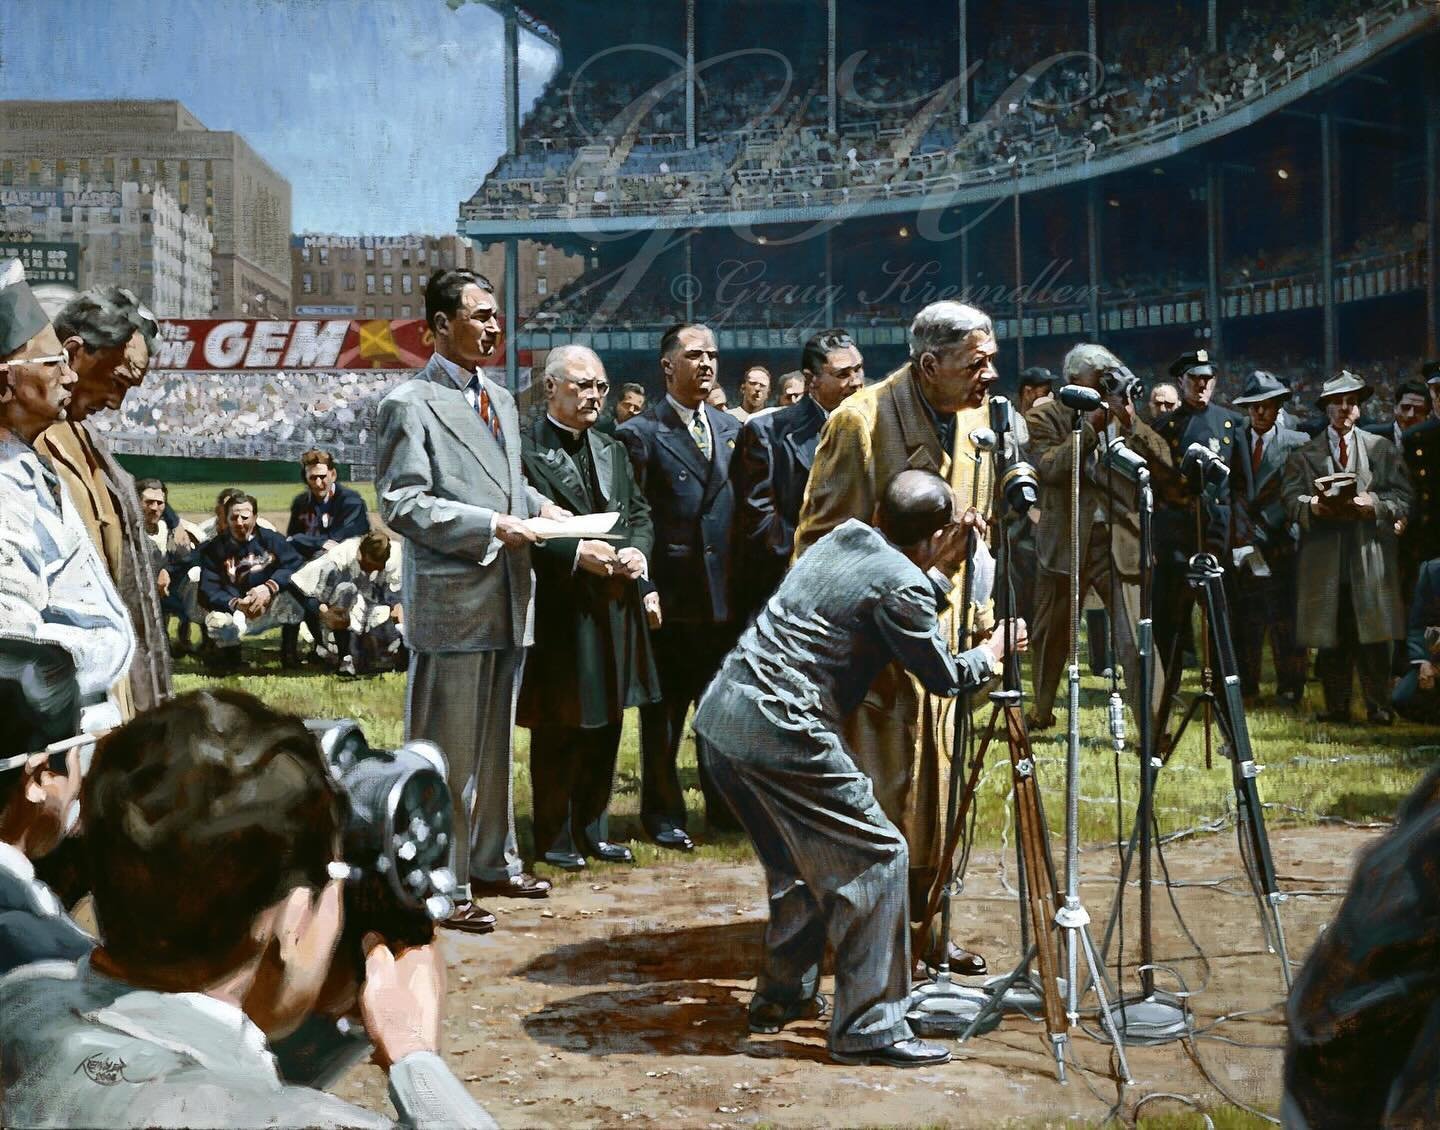 On this day in 1947, &lsquo;Babe Ruth Day&rsquo; was celebrated throughout the majors. 58,000 came out to Yankee Stadium to honor the ailing legend and hear him promote baseball as &ldquo;the only real game in the world.&rdquo; Here&rsquo;s my painti